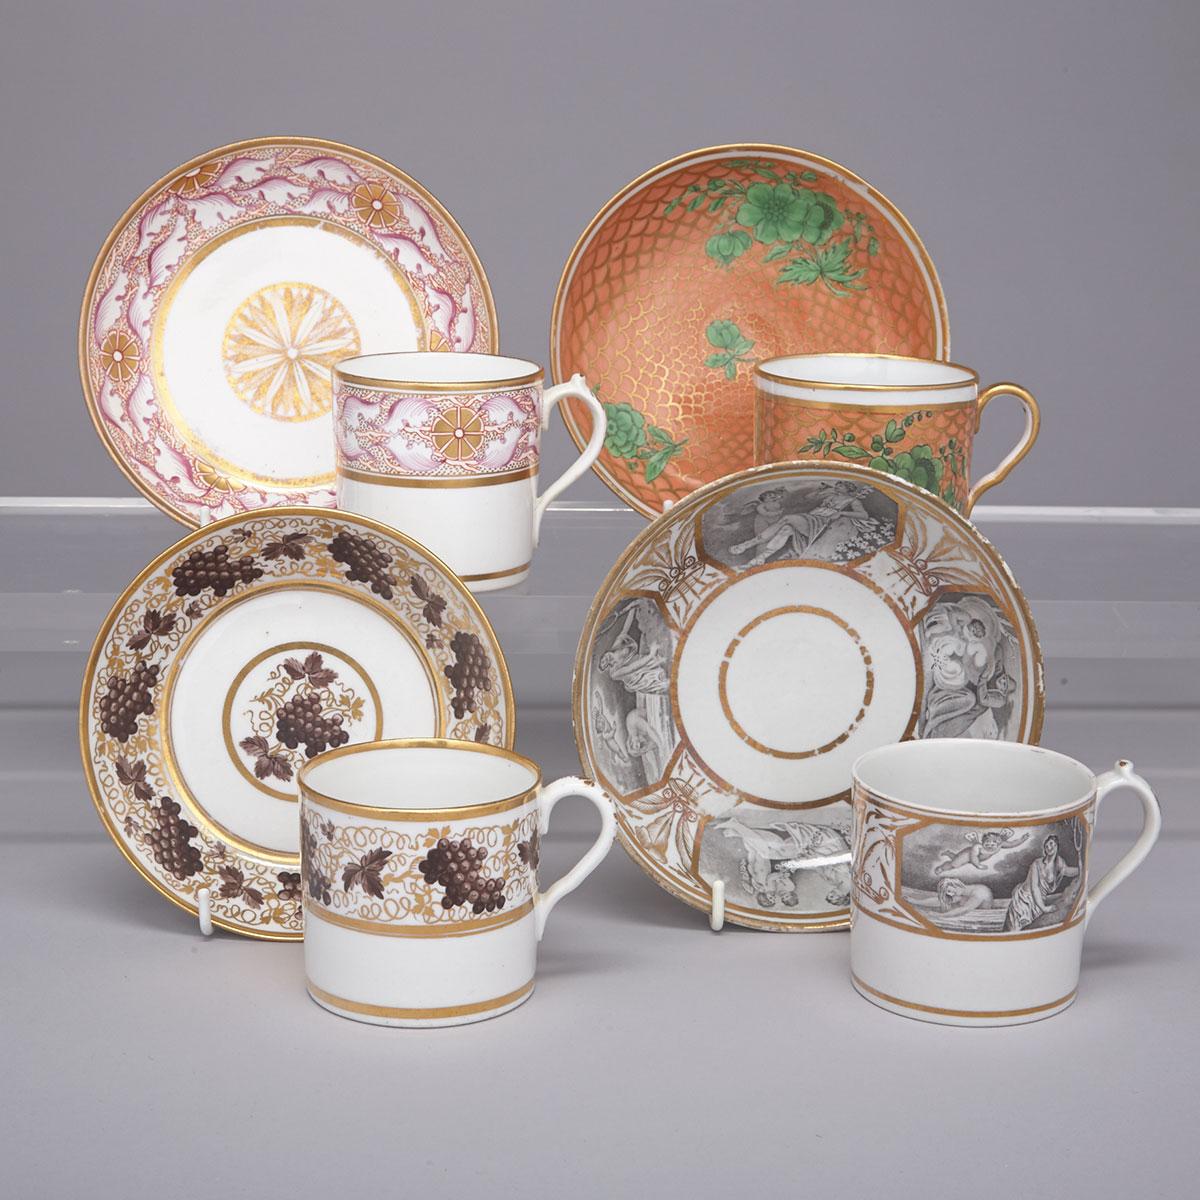 Four Various English Porcelain Coffee Cans and Saucers, c.1800-1810